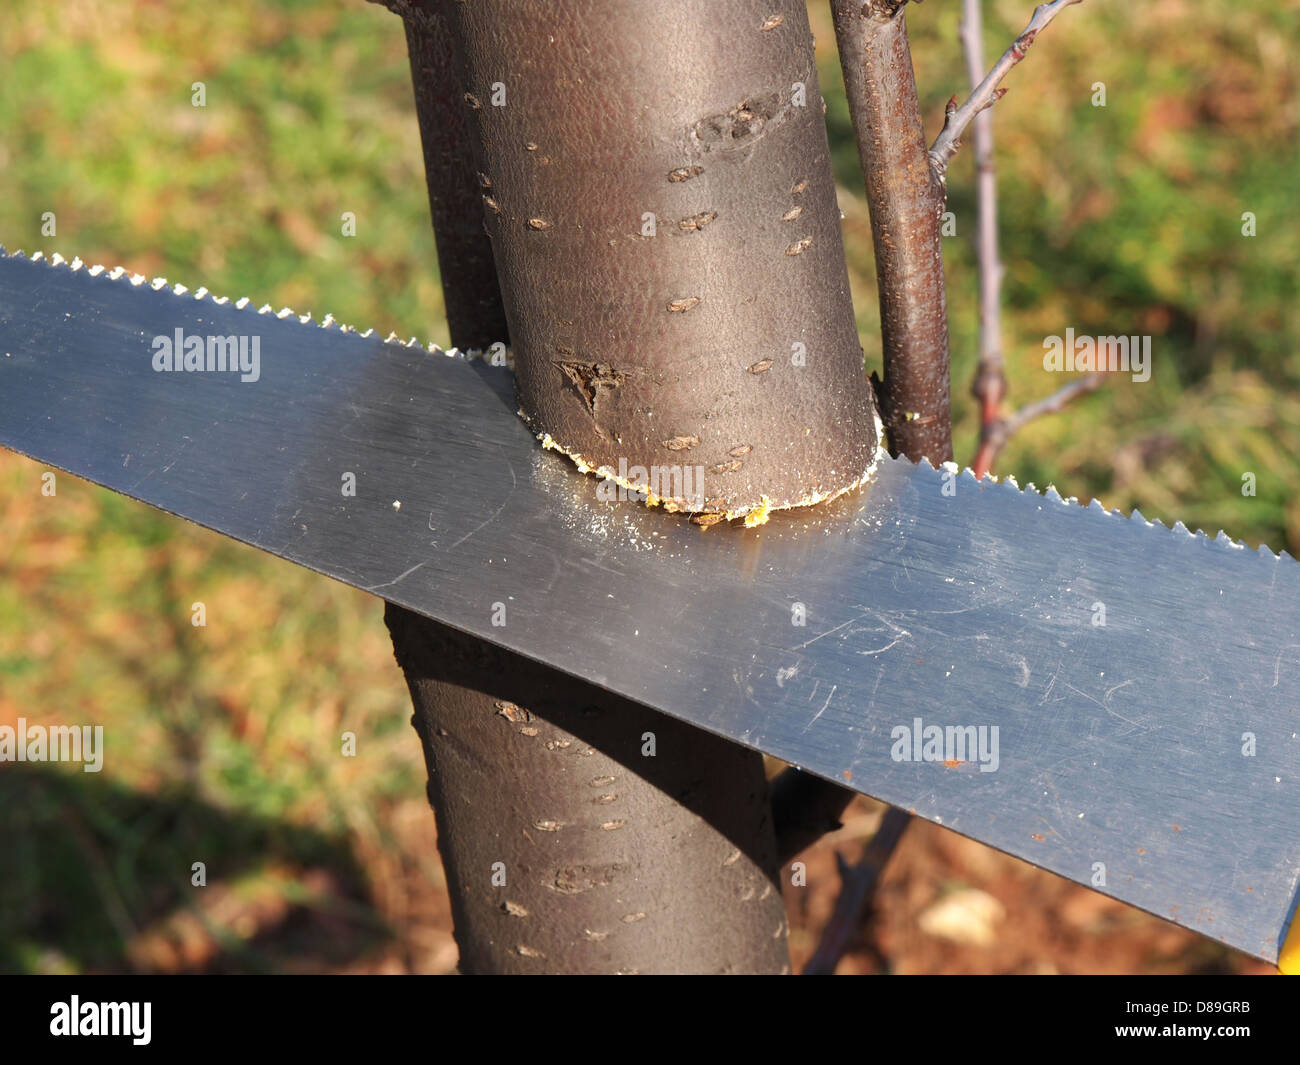 cutting branch of a tree with a saw Stock Photo